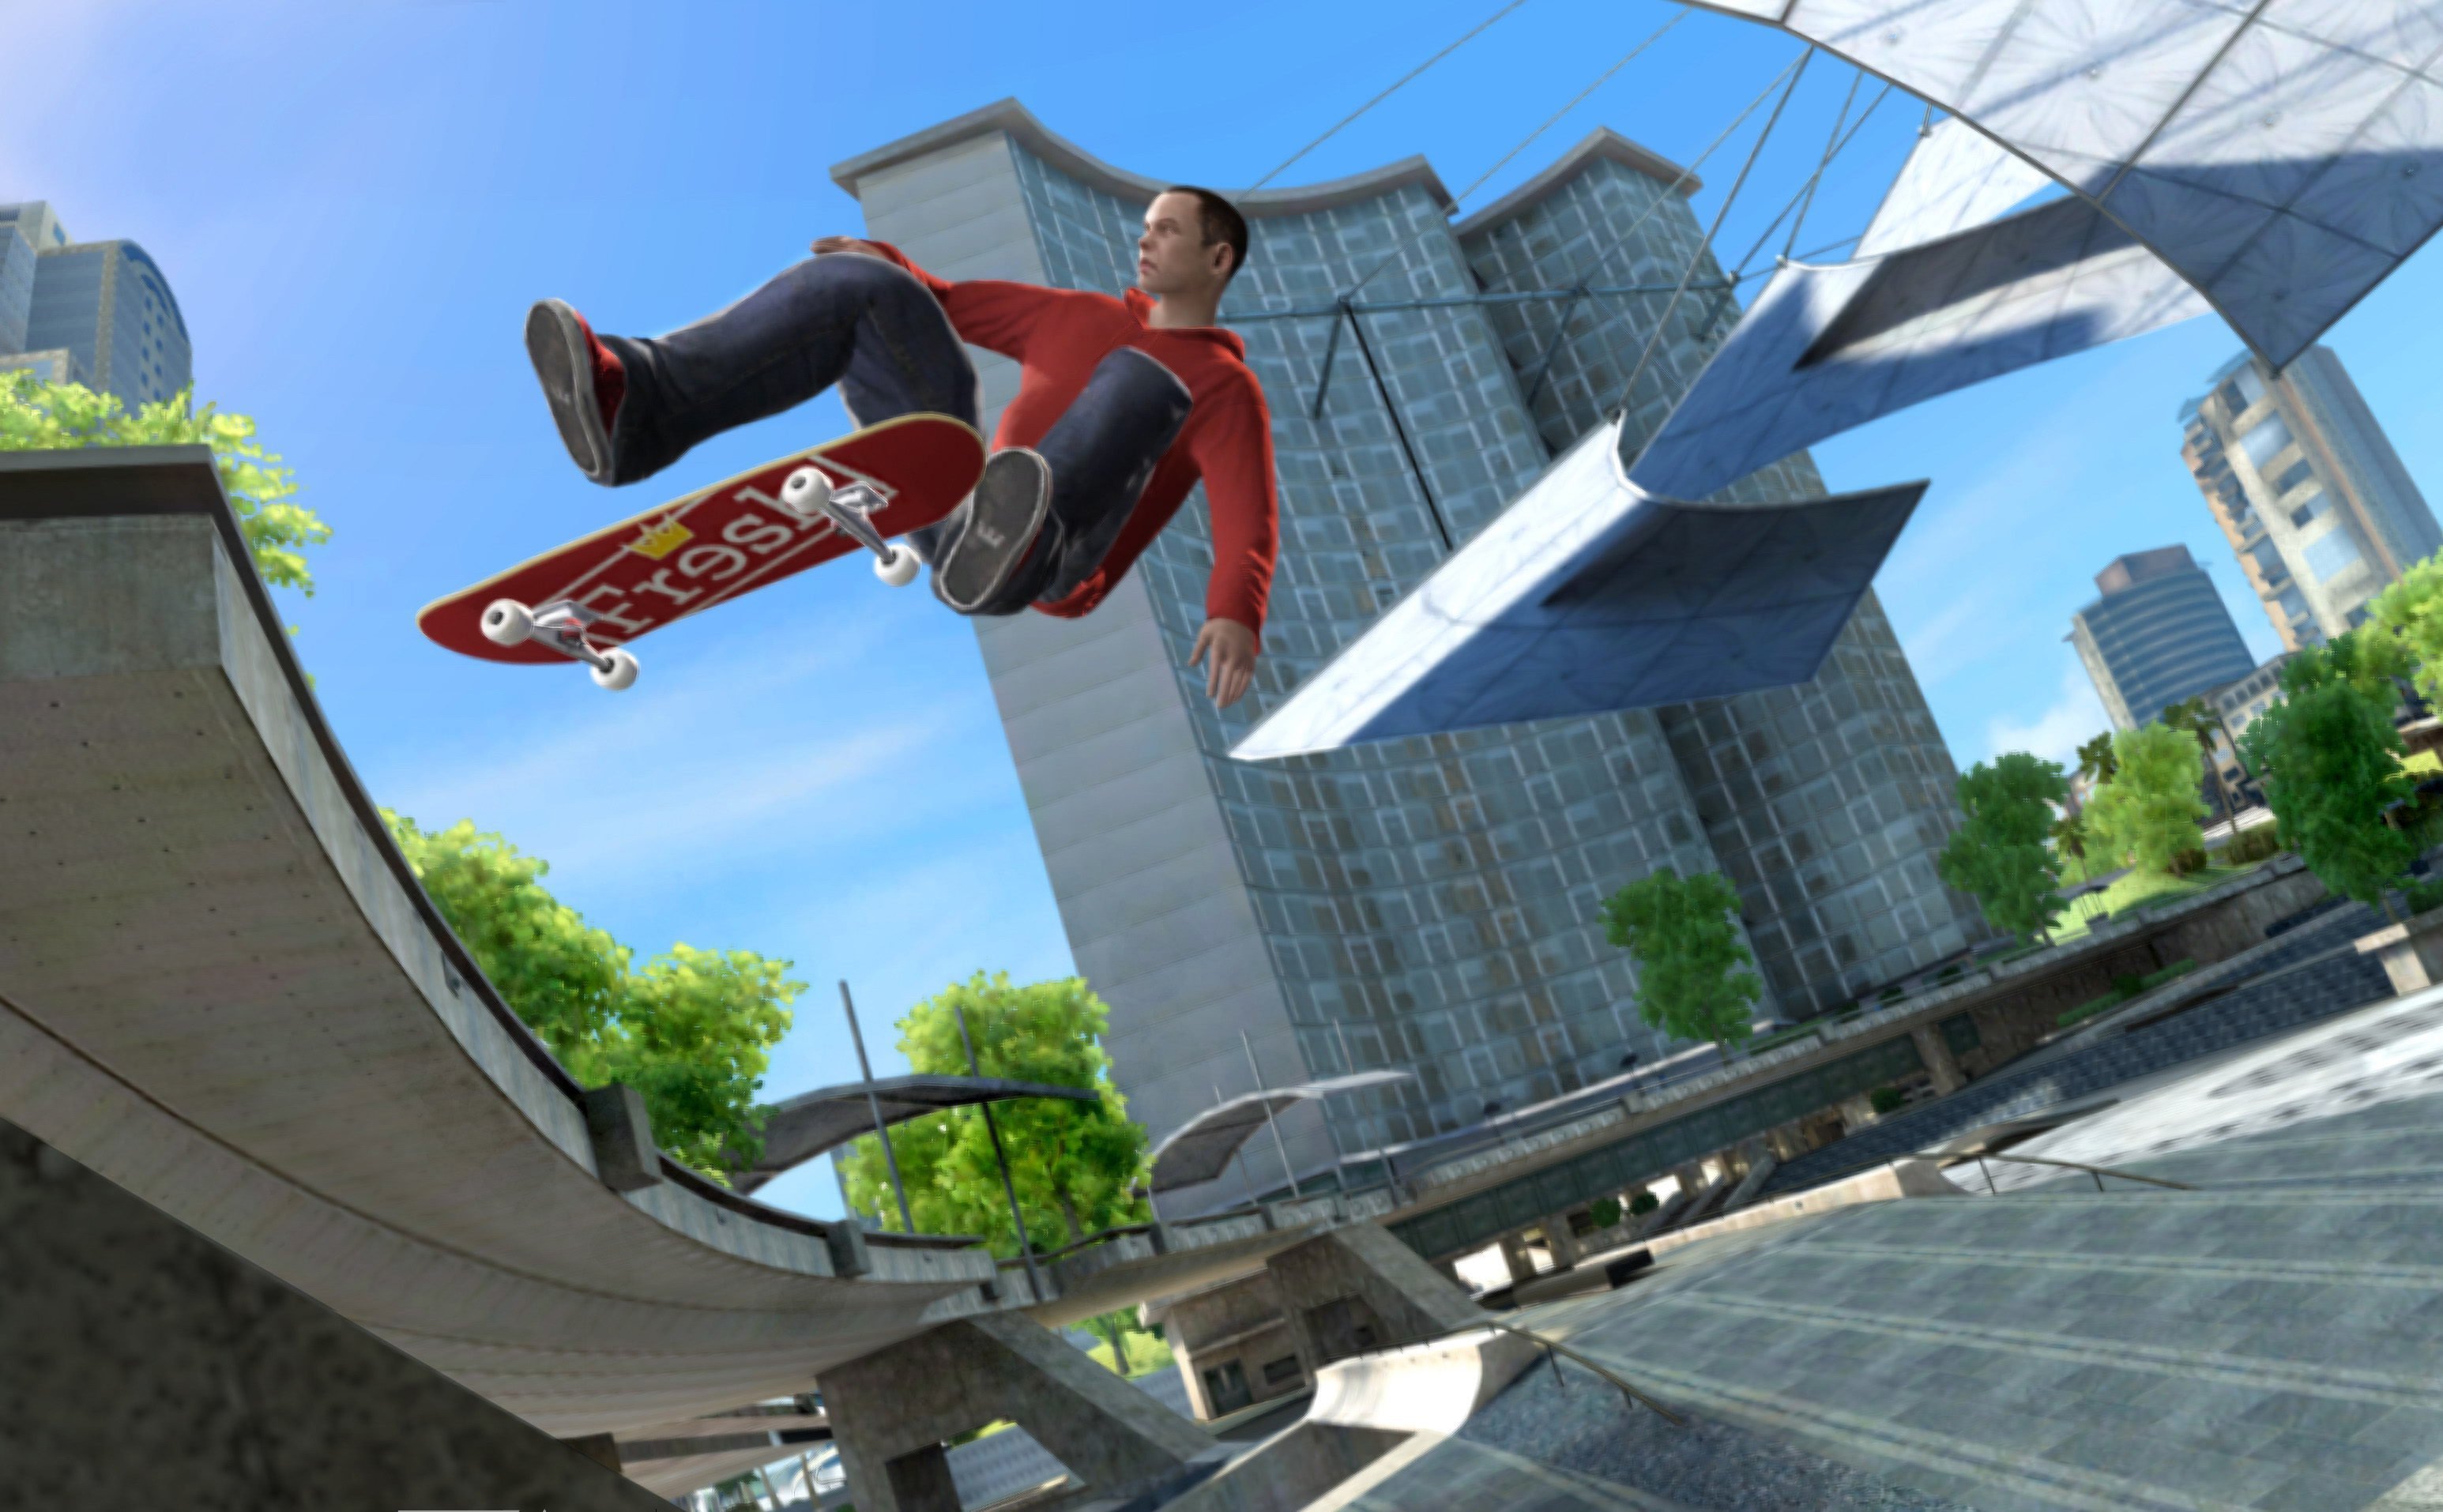 skate 3 on xbox one s